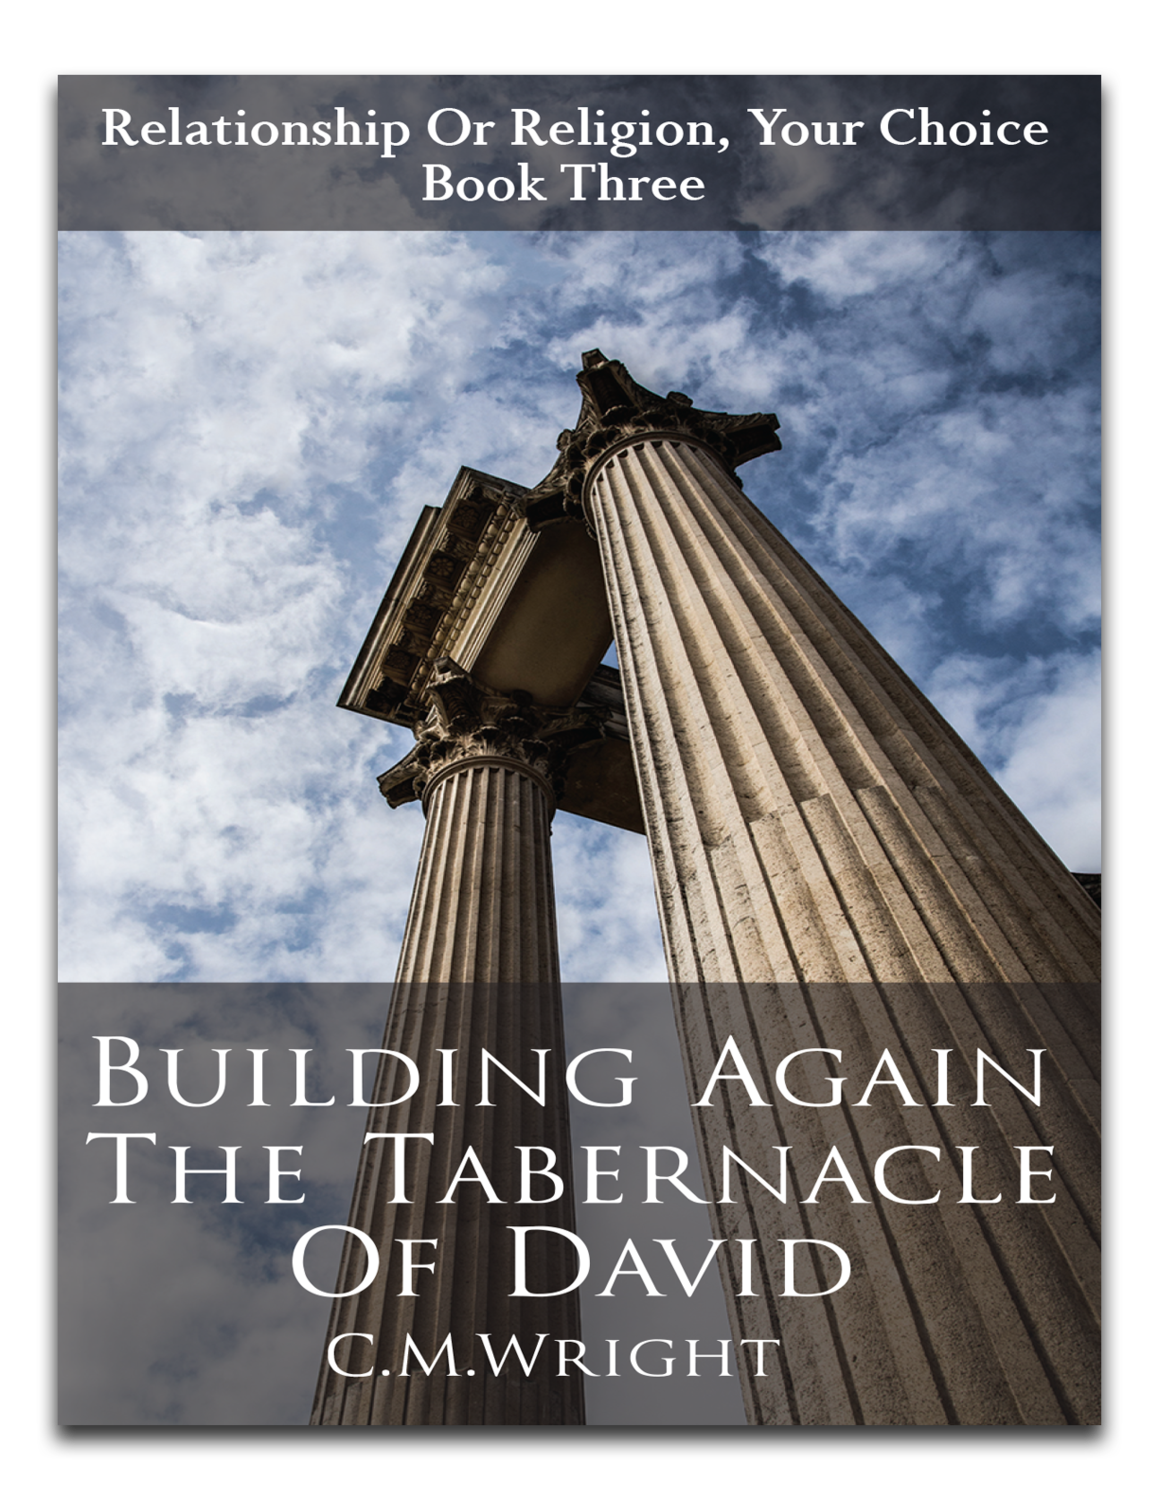 Building Again The Tabernacle Of David by C.M. Wright